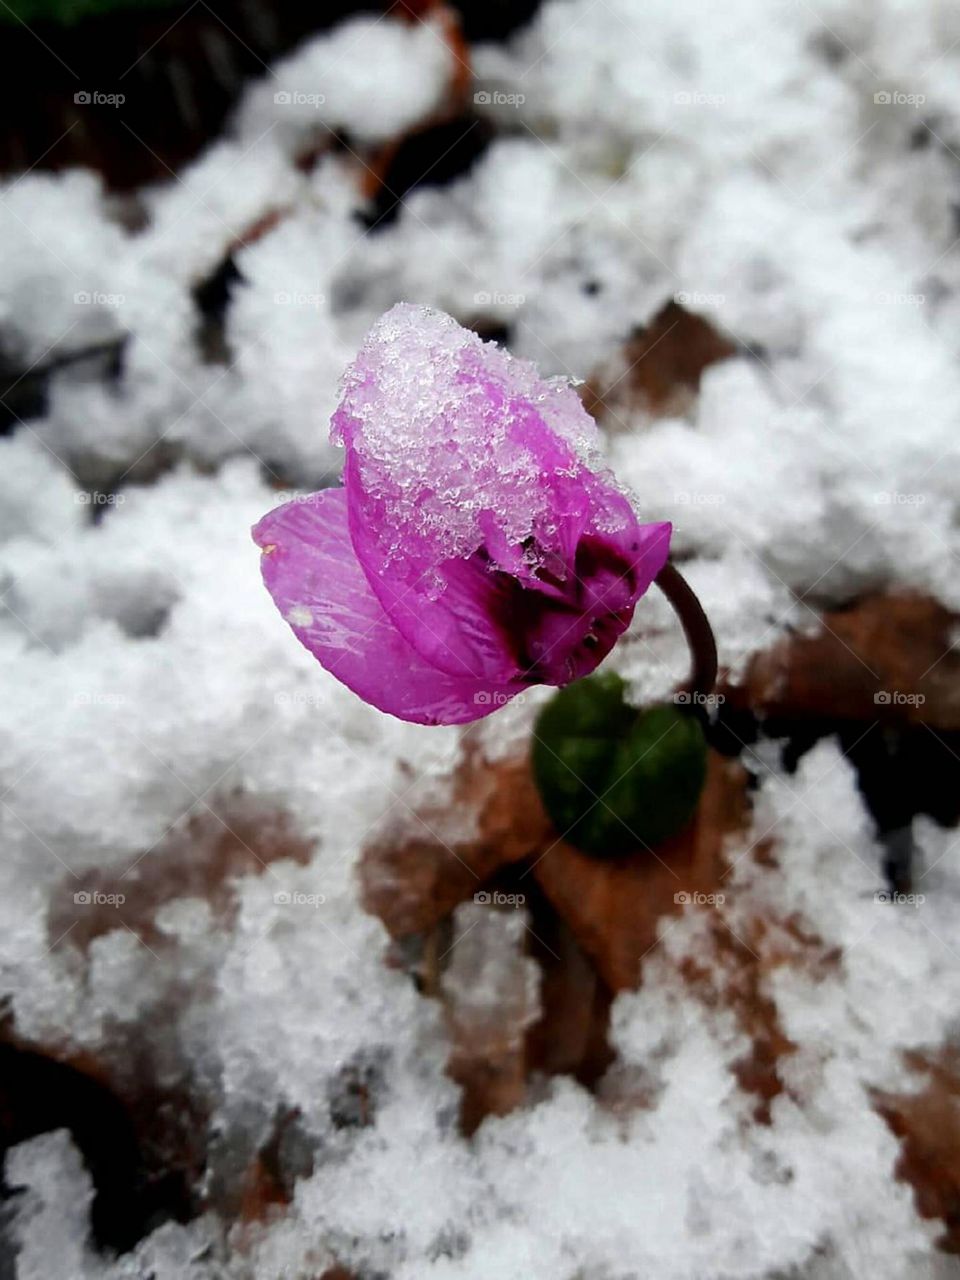 Flowers can make the beautiful winter more beautiful!